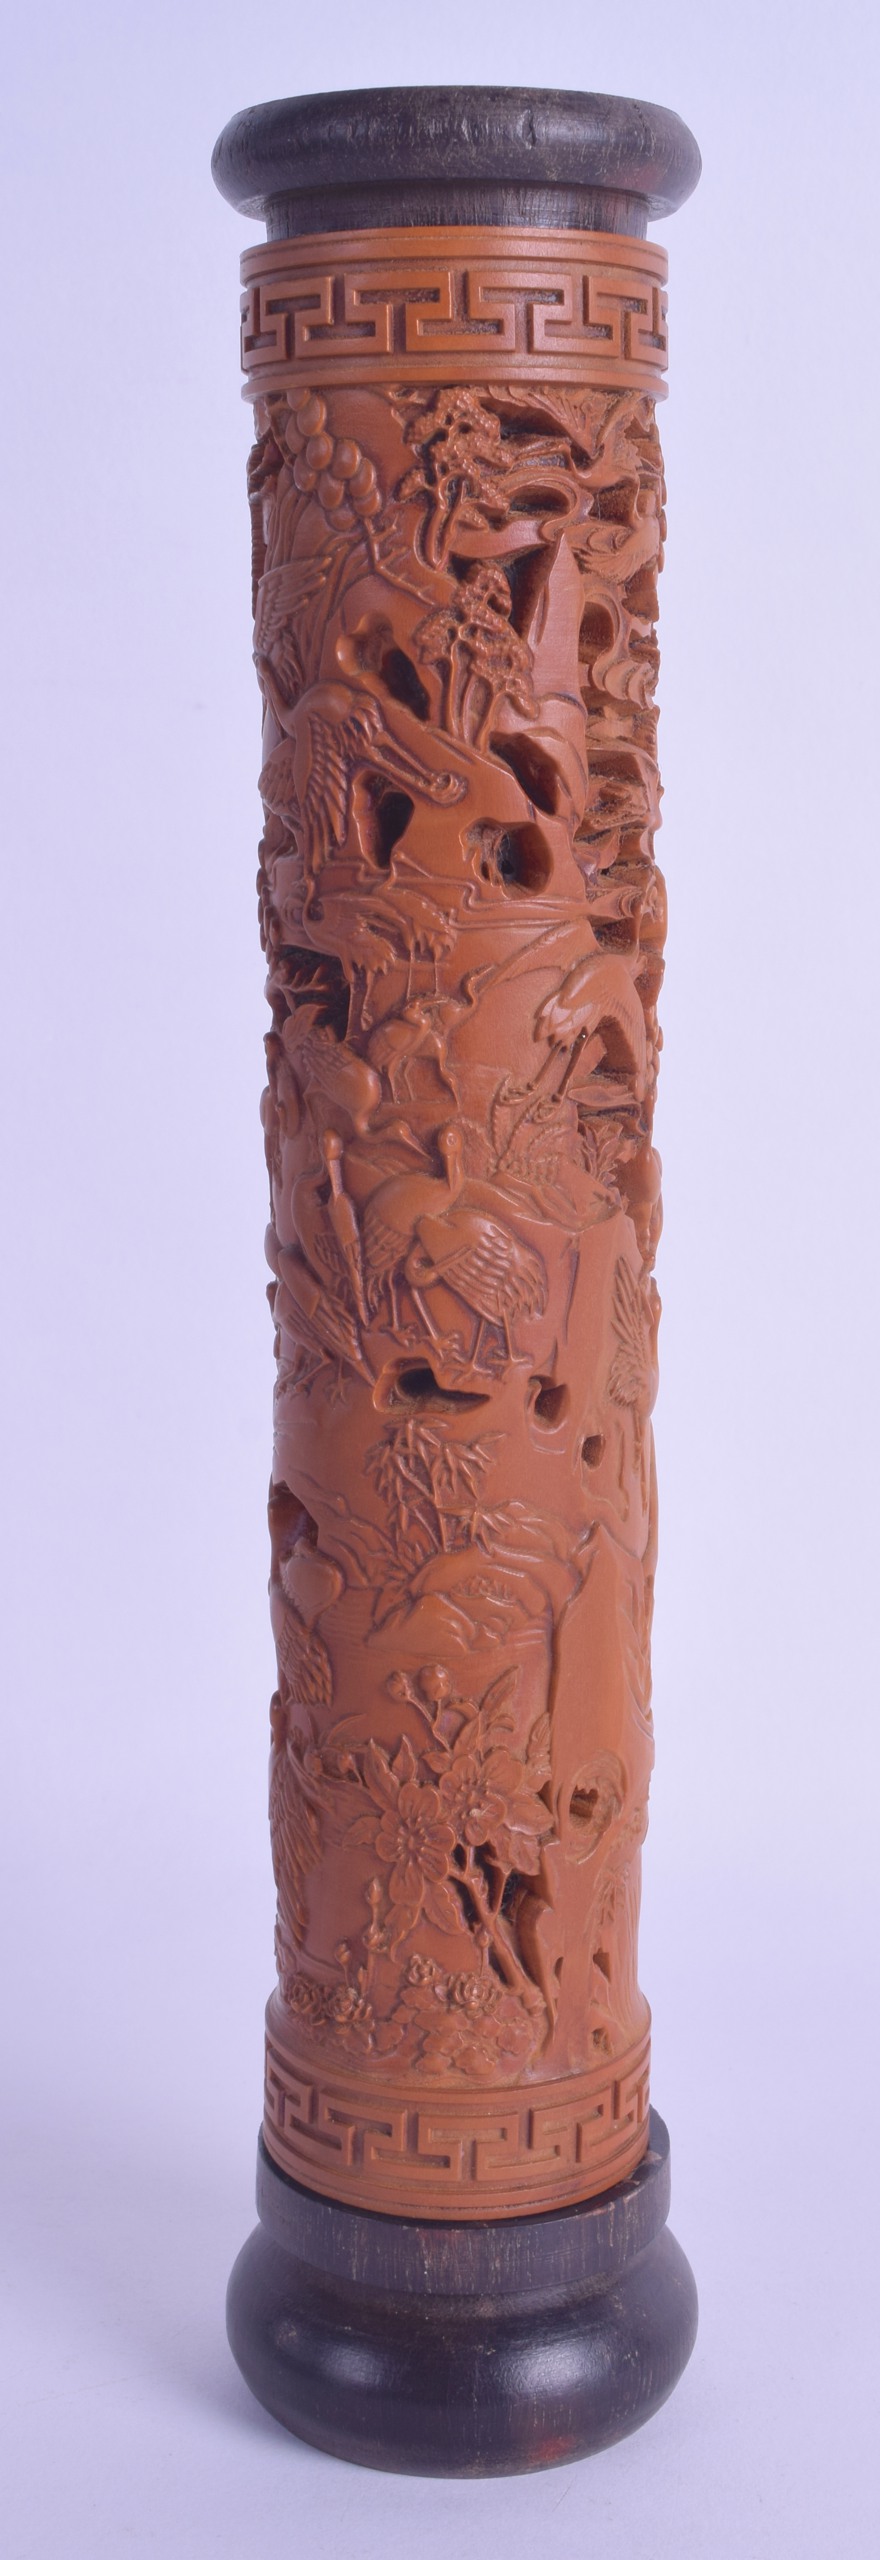 A CHINESE REPUBLICAN PERIOD CARVED BAMBOO PARFUMIER decorated with extensive birds and flowers. 25